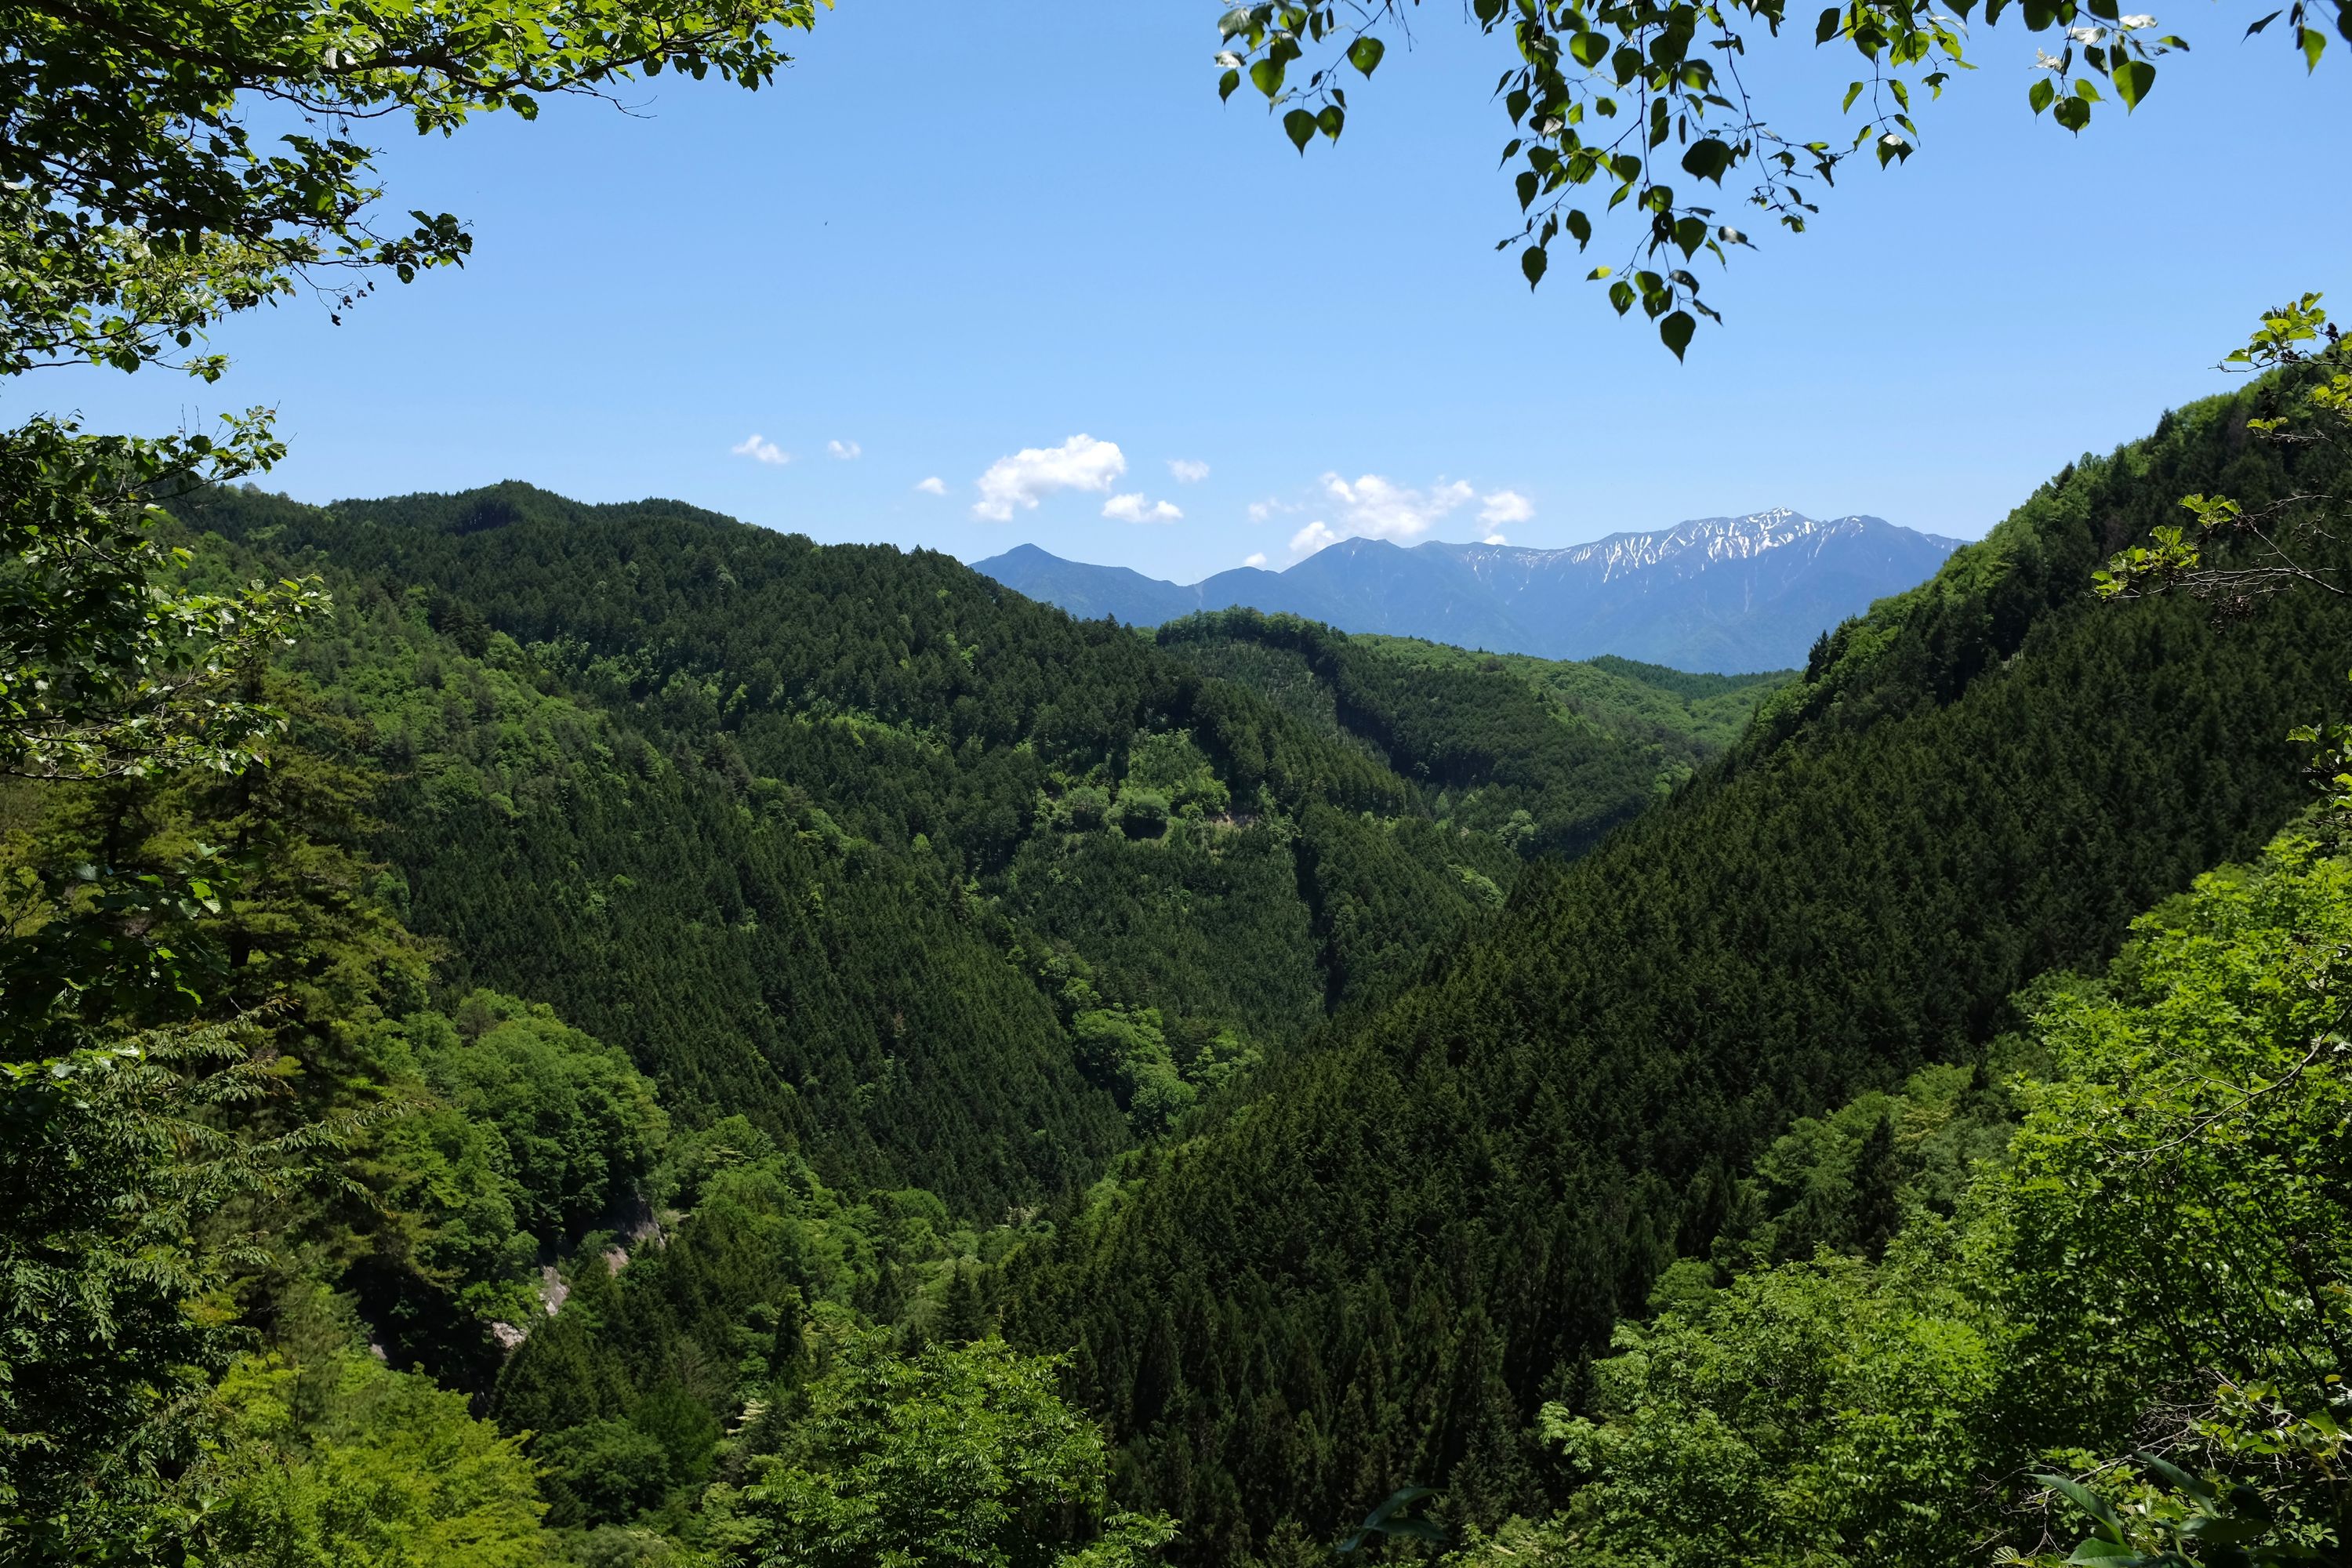 The view east, towards the Kiso Mountains, from the Jizō Pass.